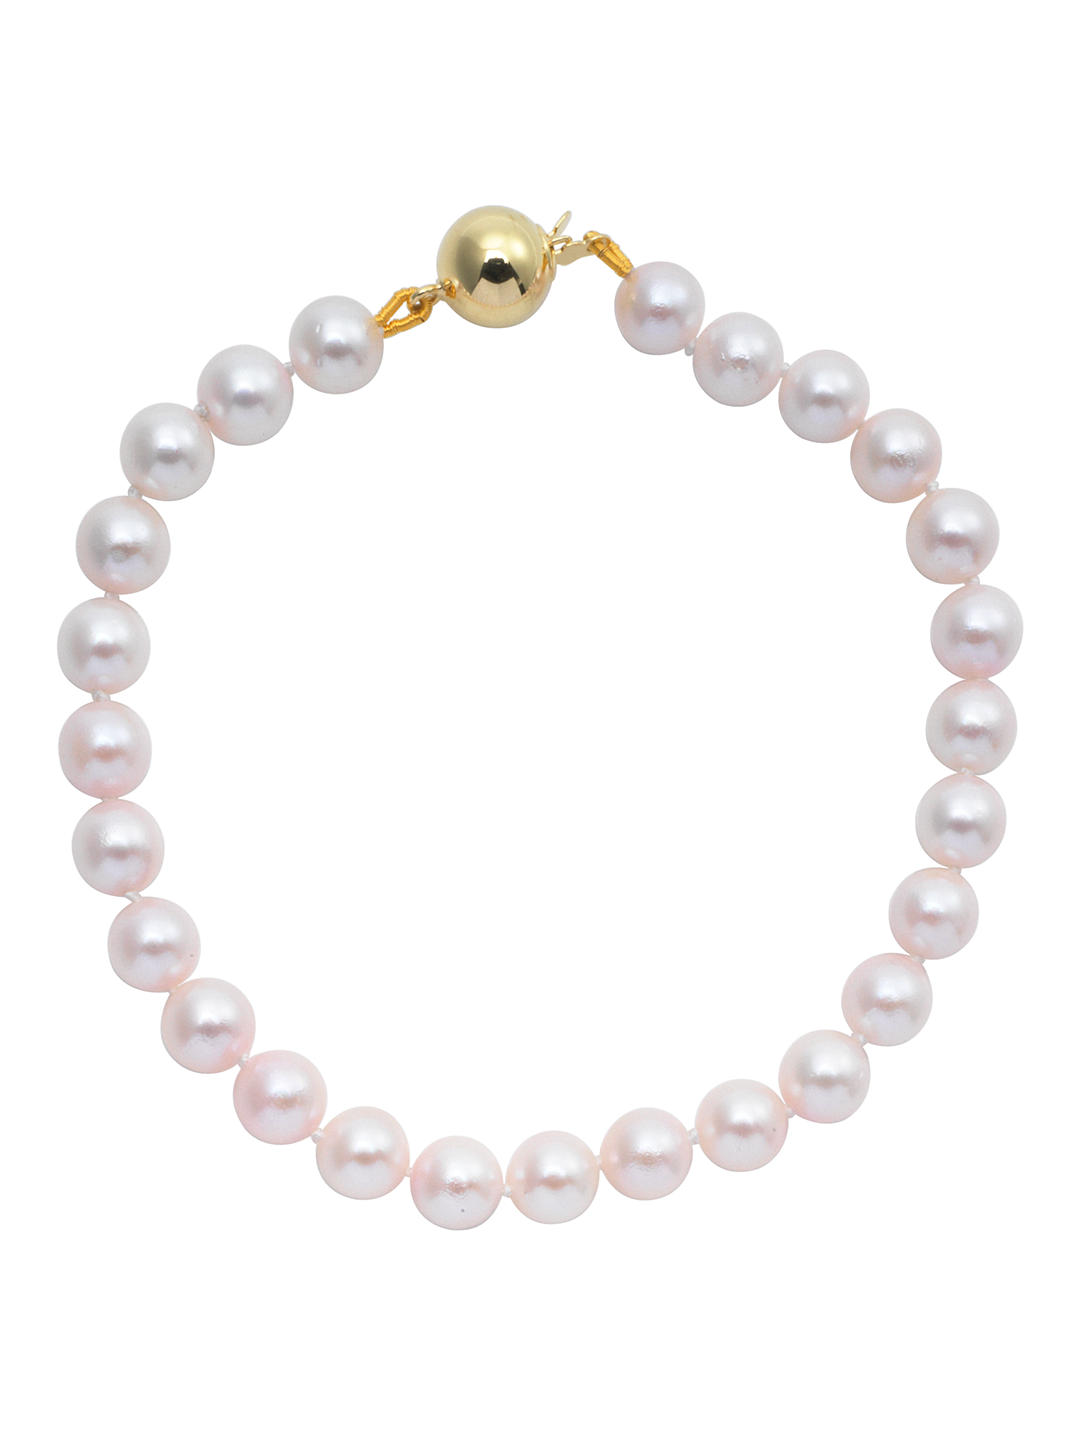 A B Davis Cultured Pearls Knotted 7.5" Bracelet with Gold Clasp